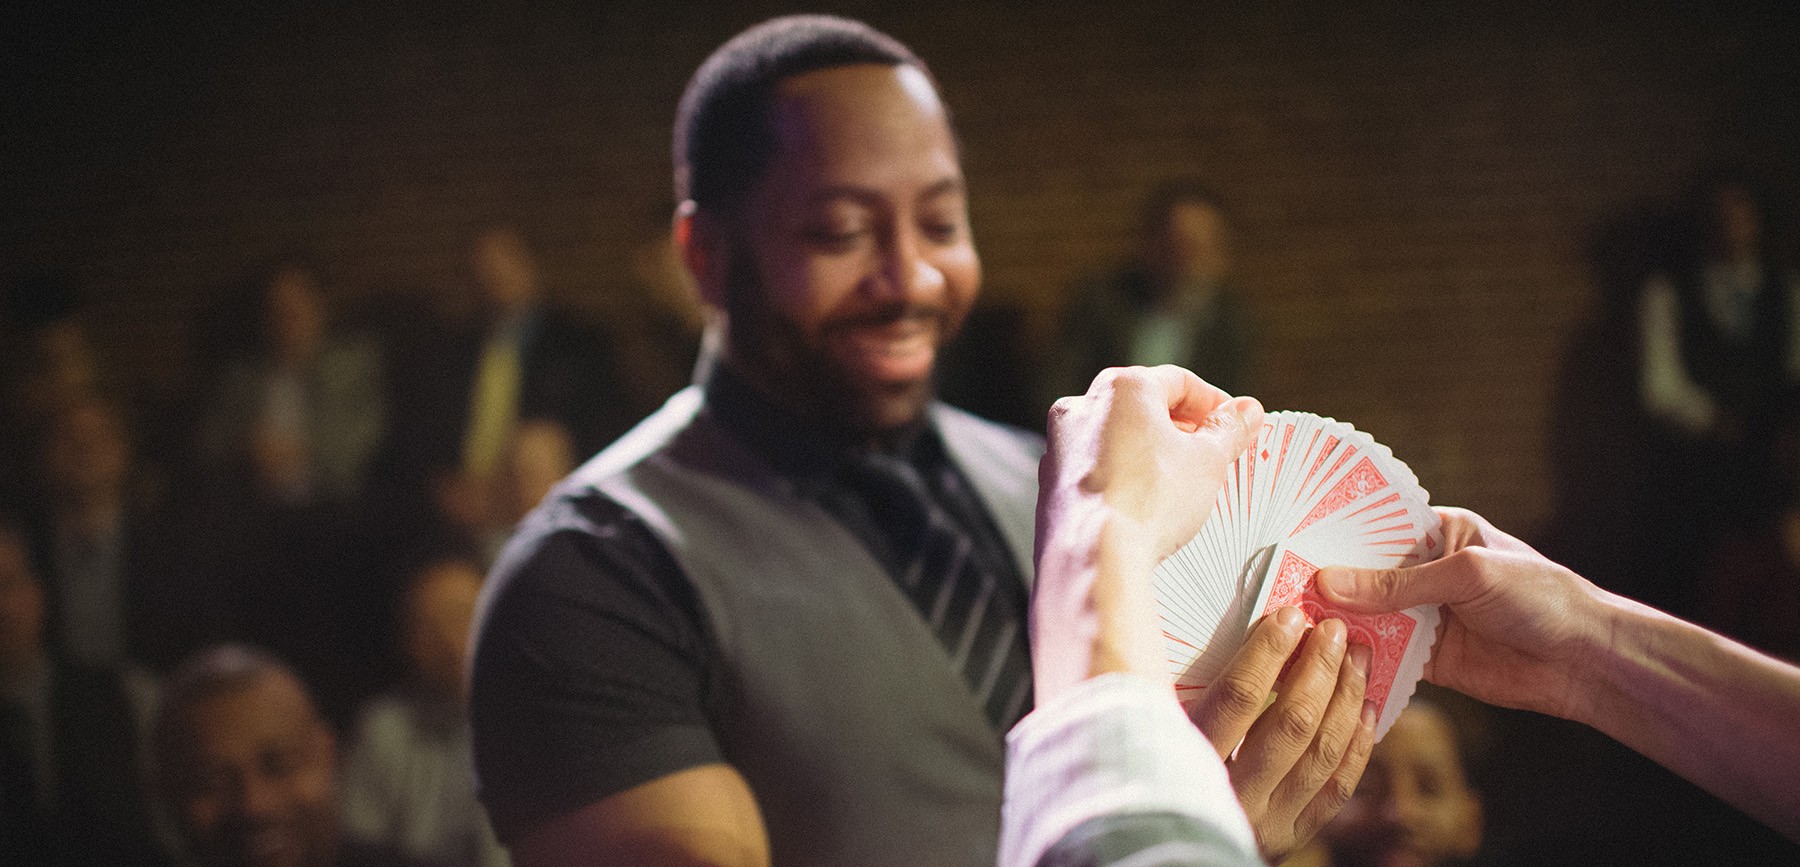 an audience member chooses a card out of a deck being held by a magician